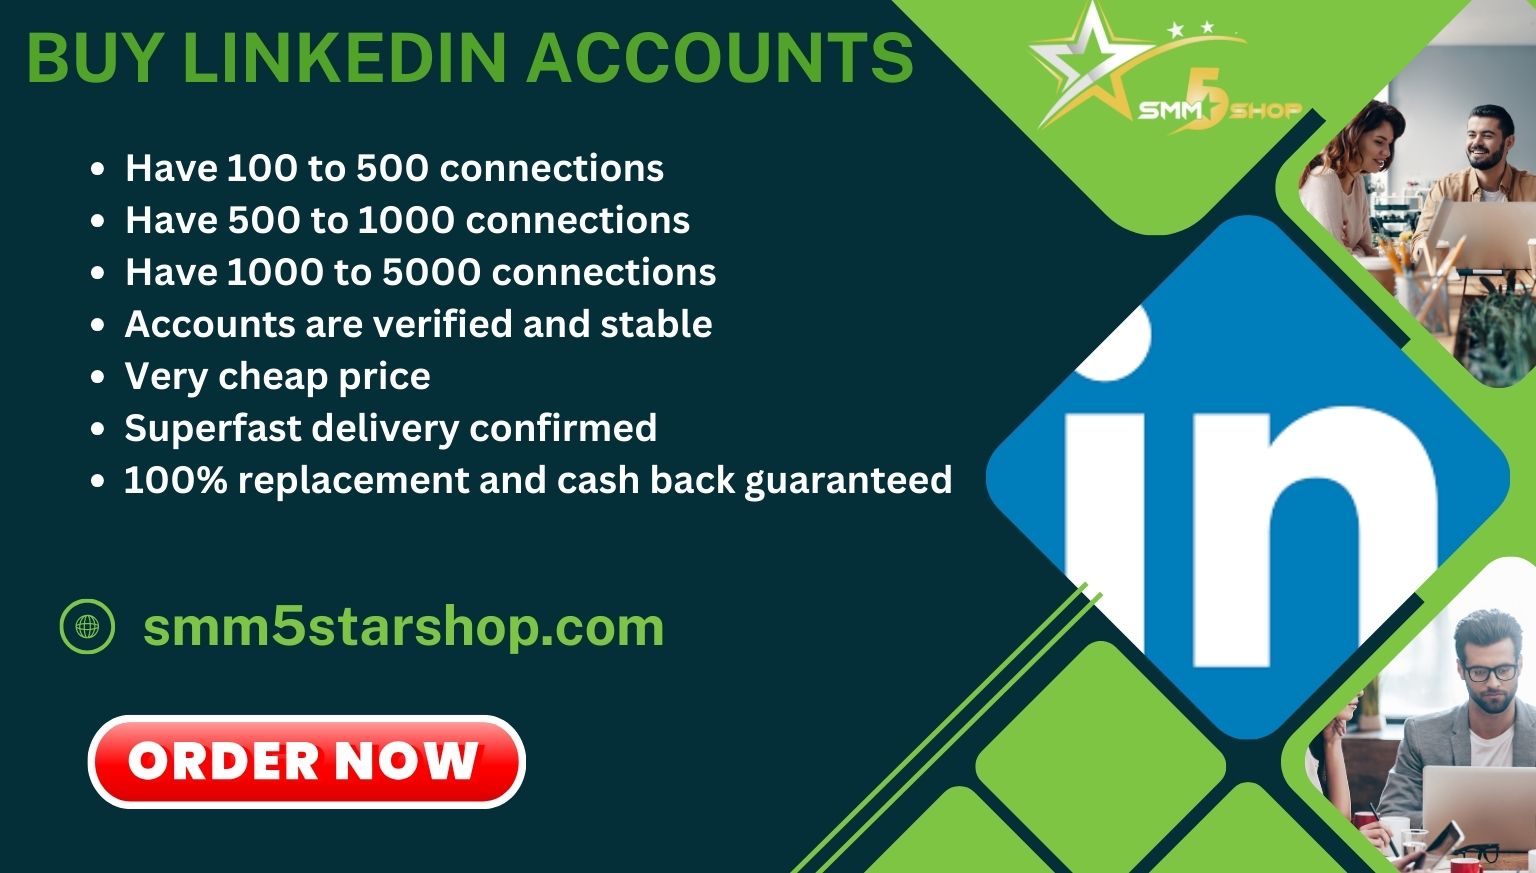 Buy LinkedIn accounts with 100 to 5000 connections and followers at very cheap price Our accounts will be verified with email, number, passport